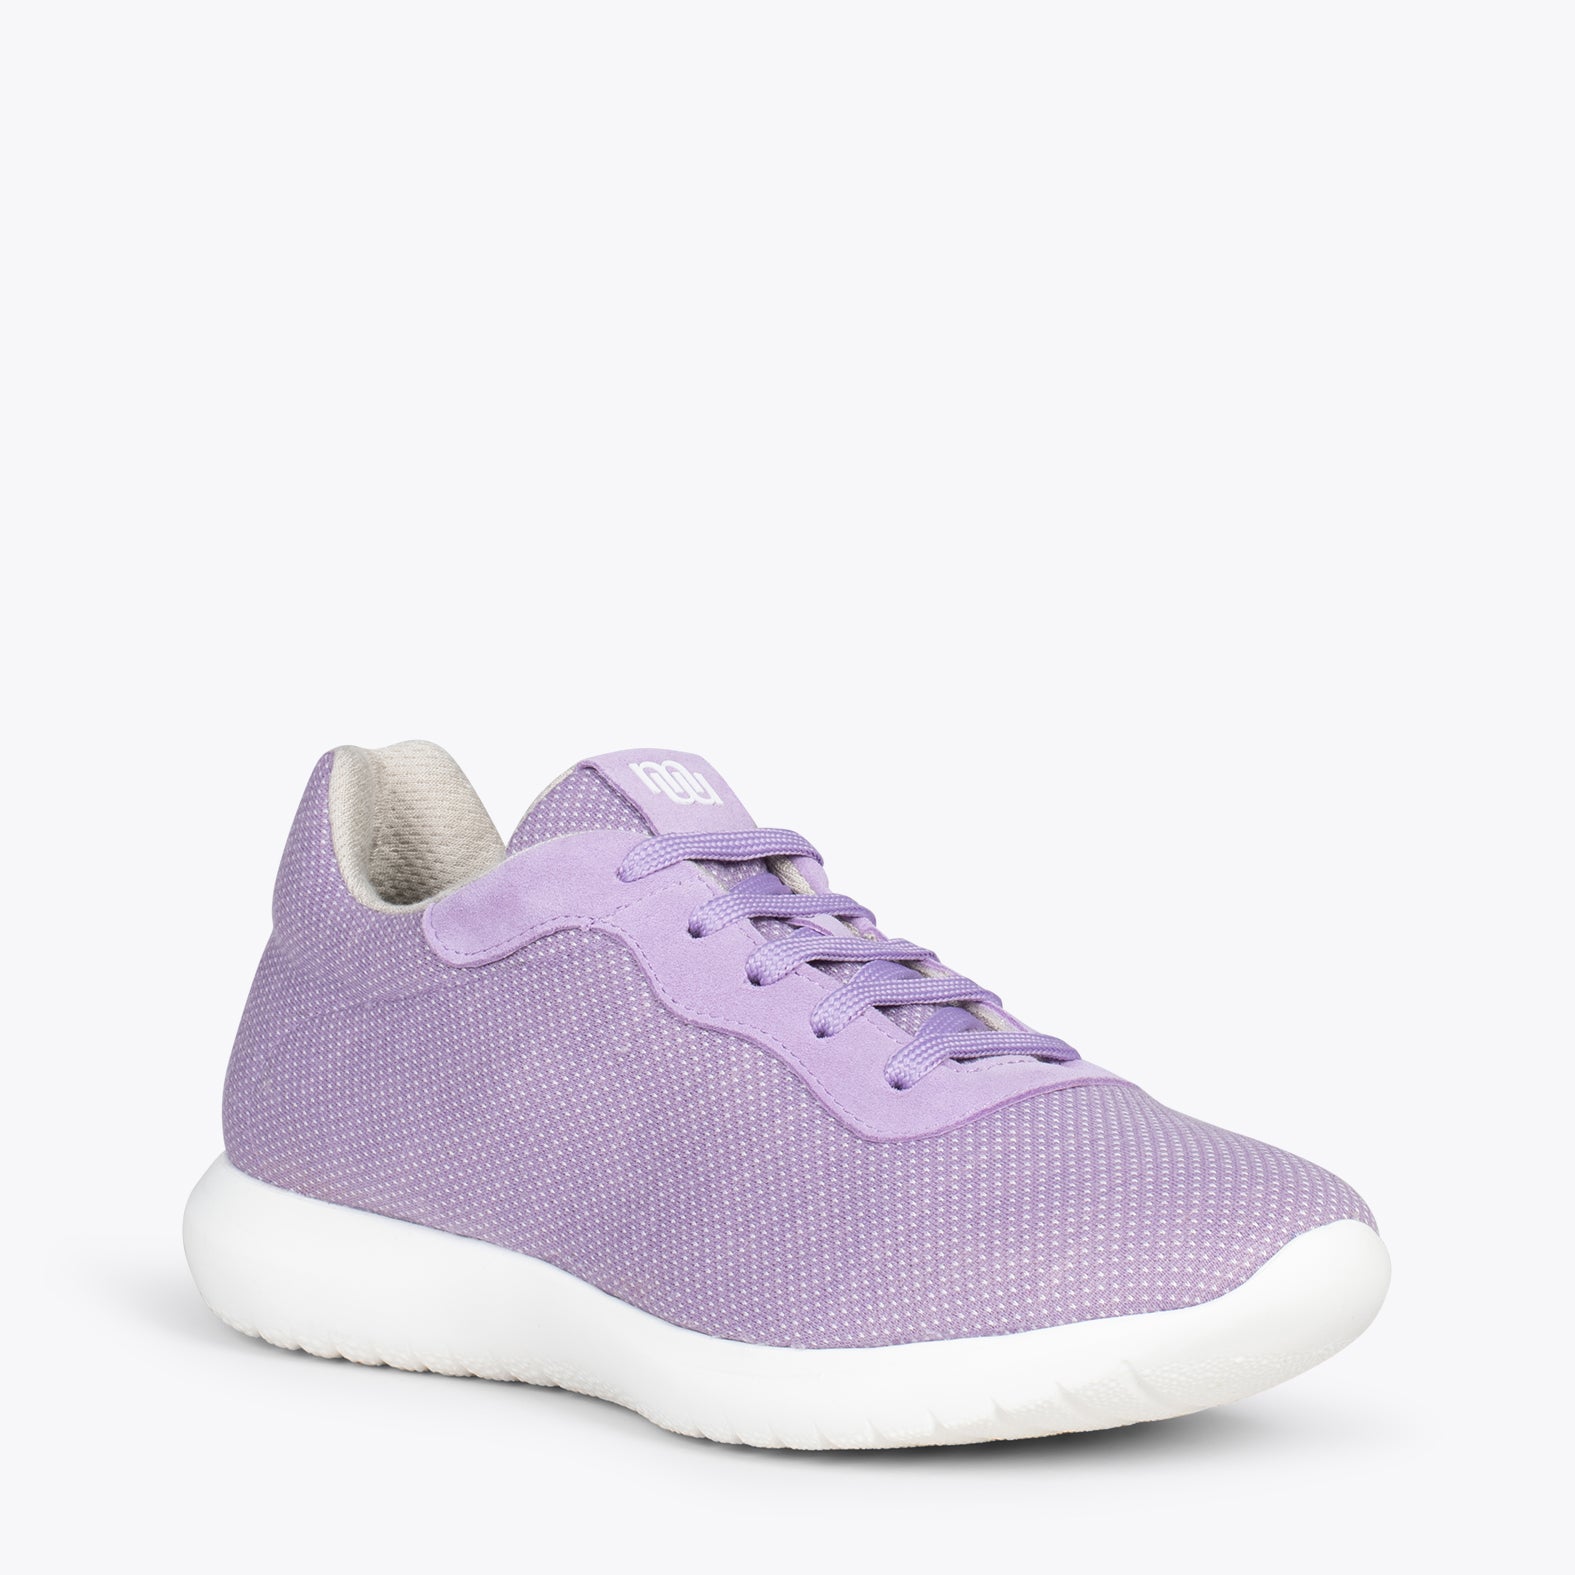 YOGA – LILAC sneakers crafted in merino wool